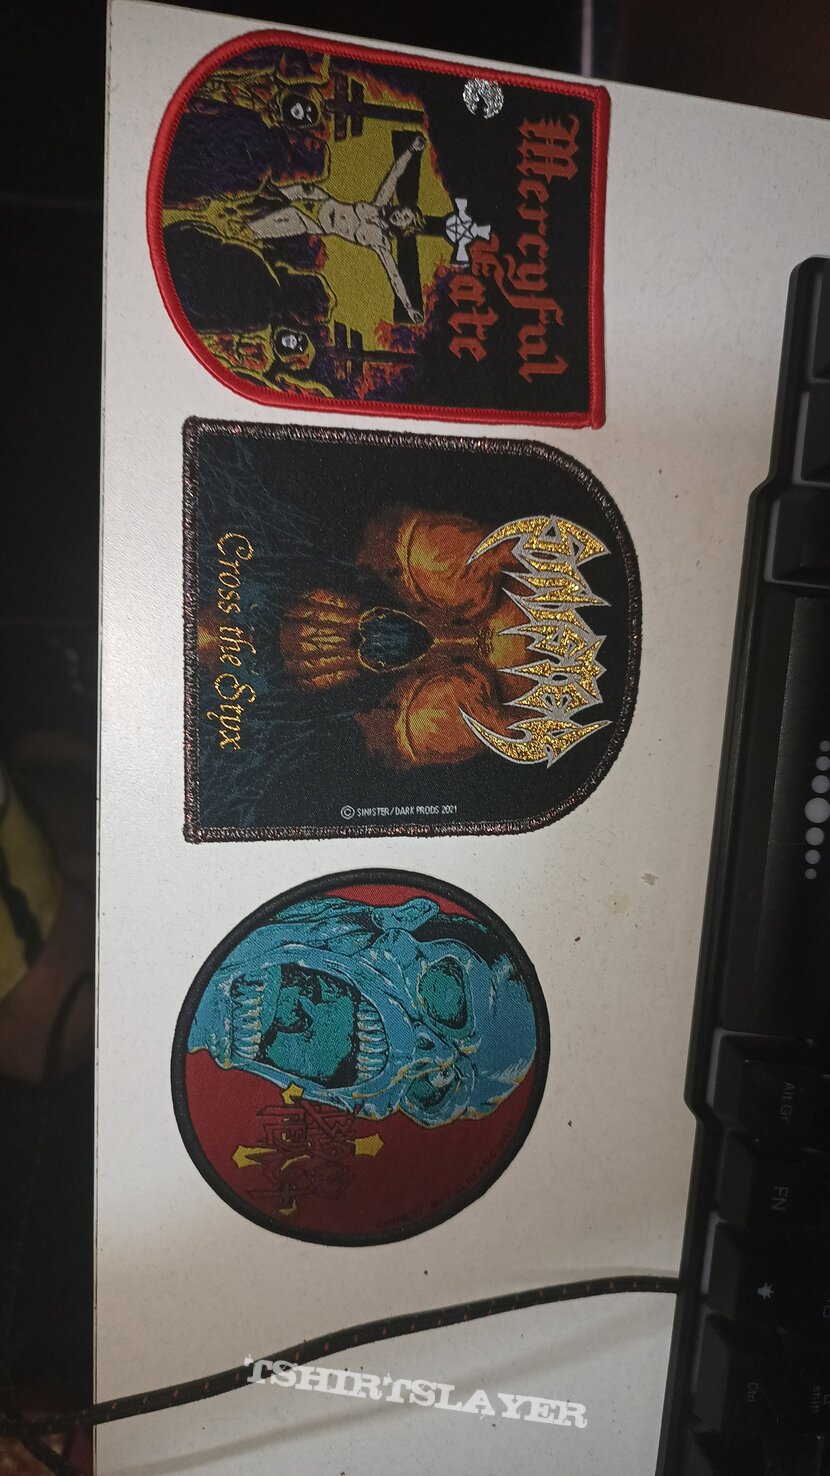 Sinister Blood Feast Mercyful Fate Patches from BHMOXM 